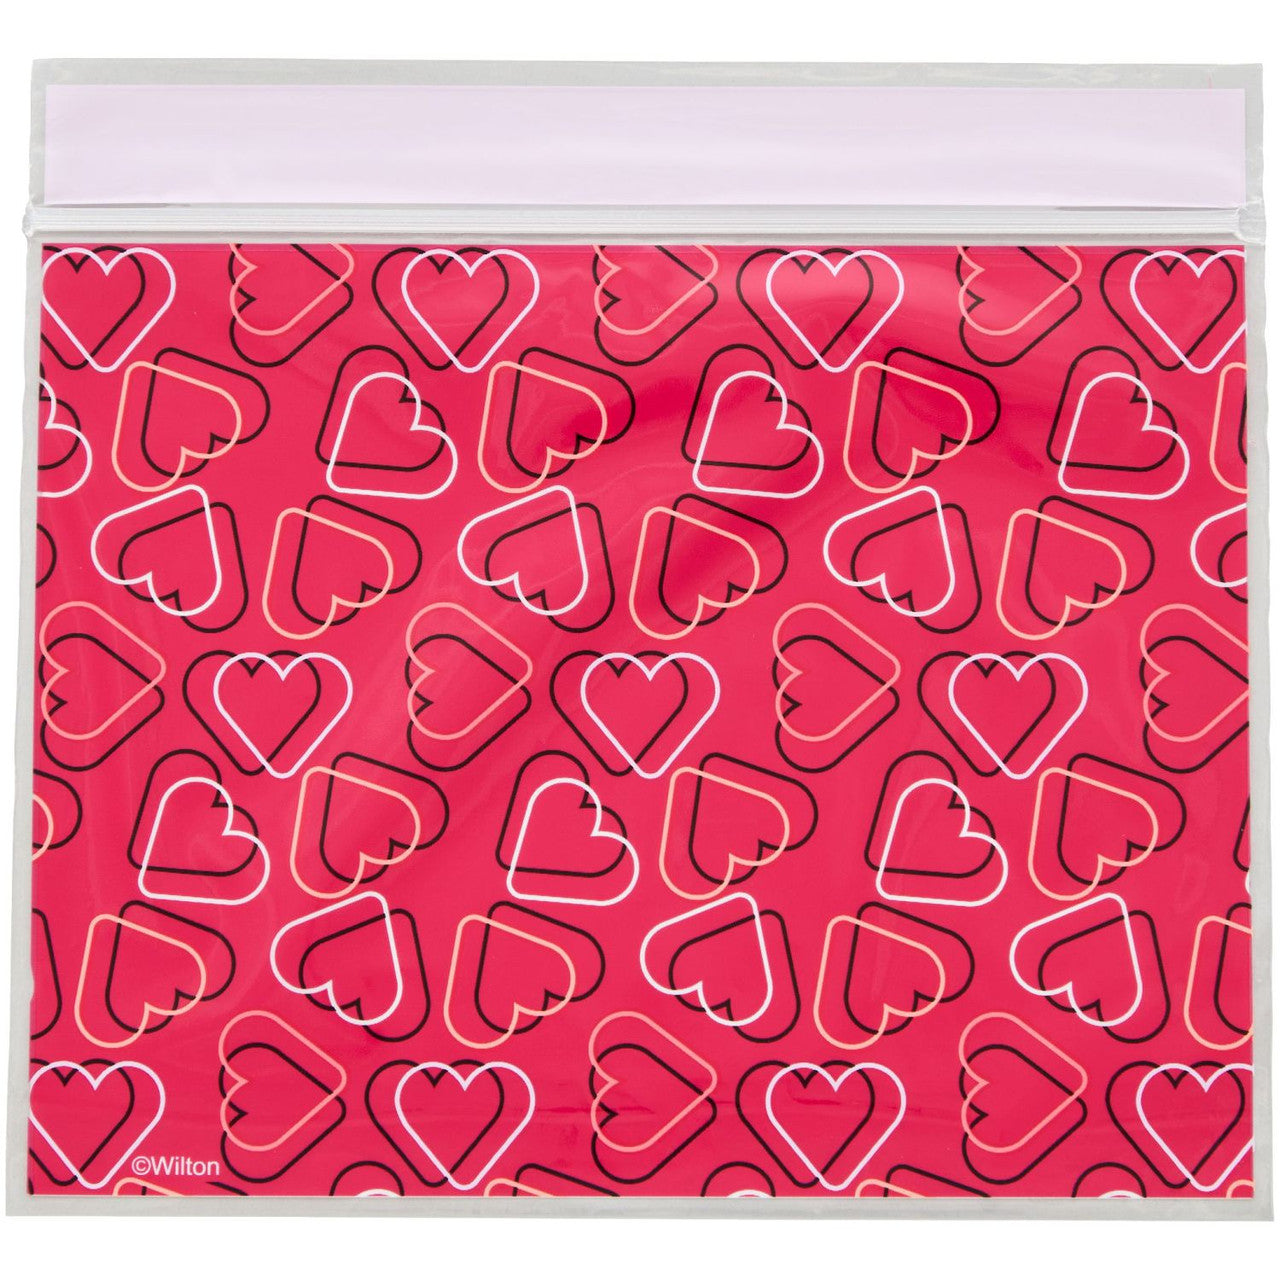 Resealable hearts treat bags by Wilton pack 20